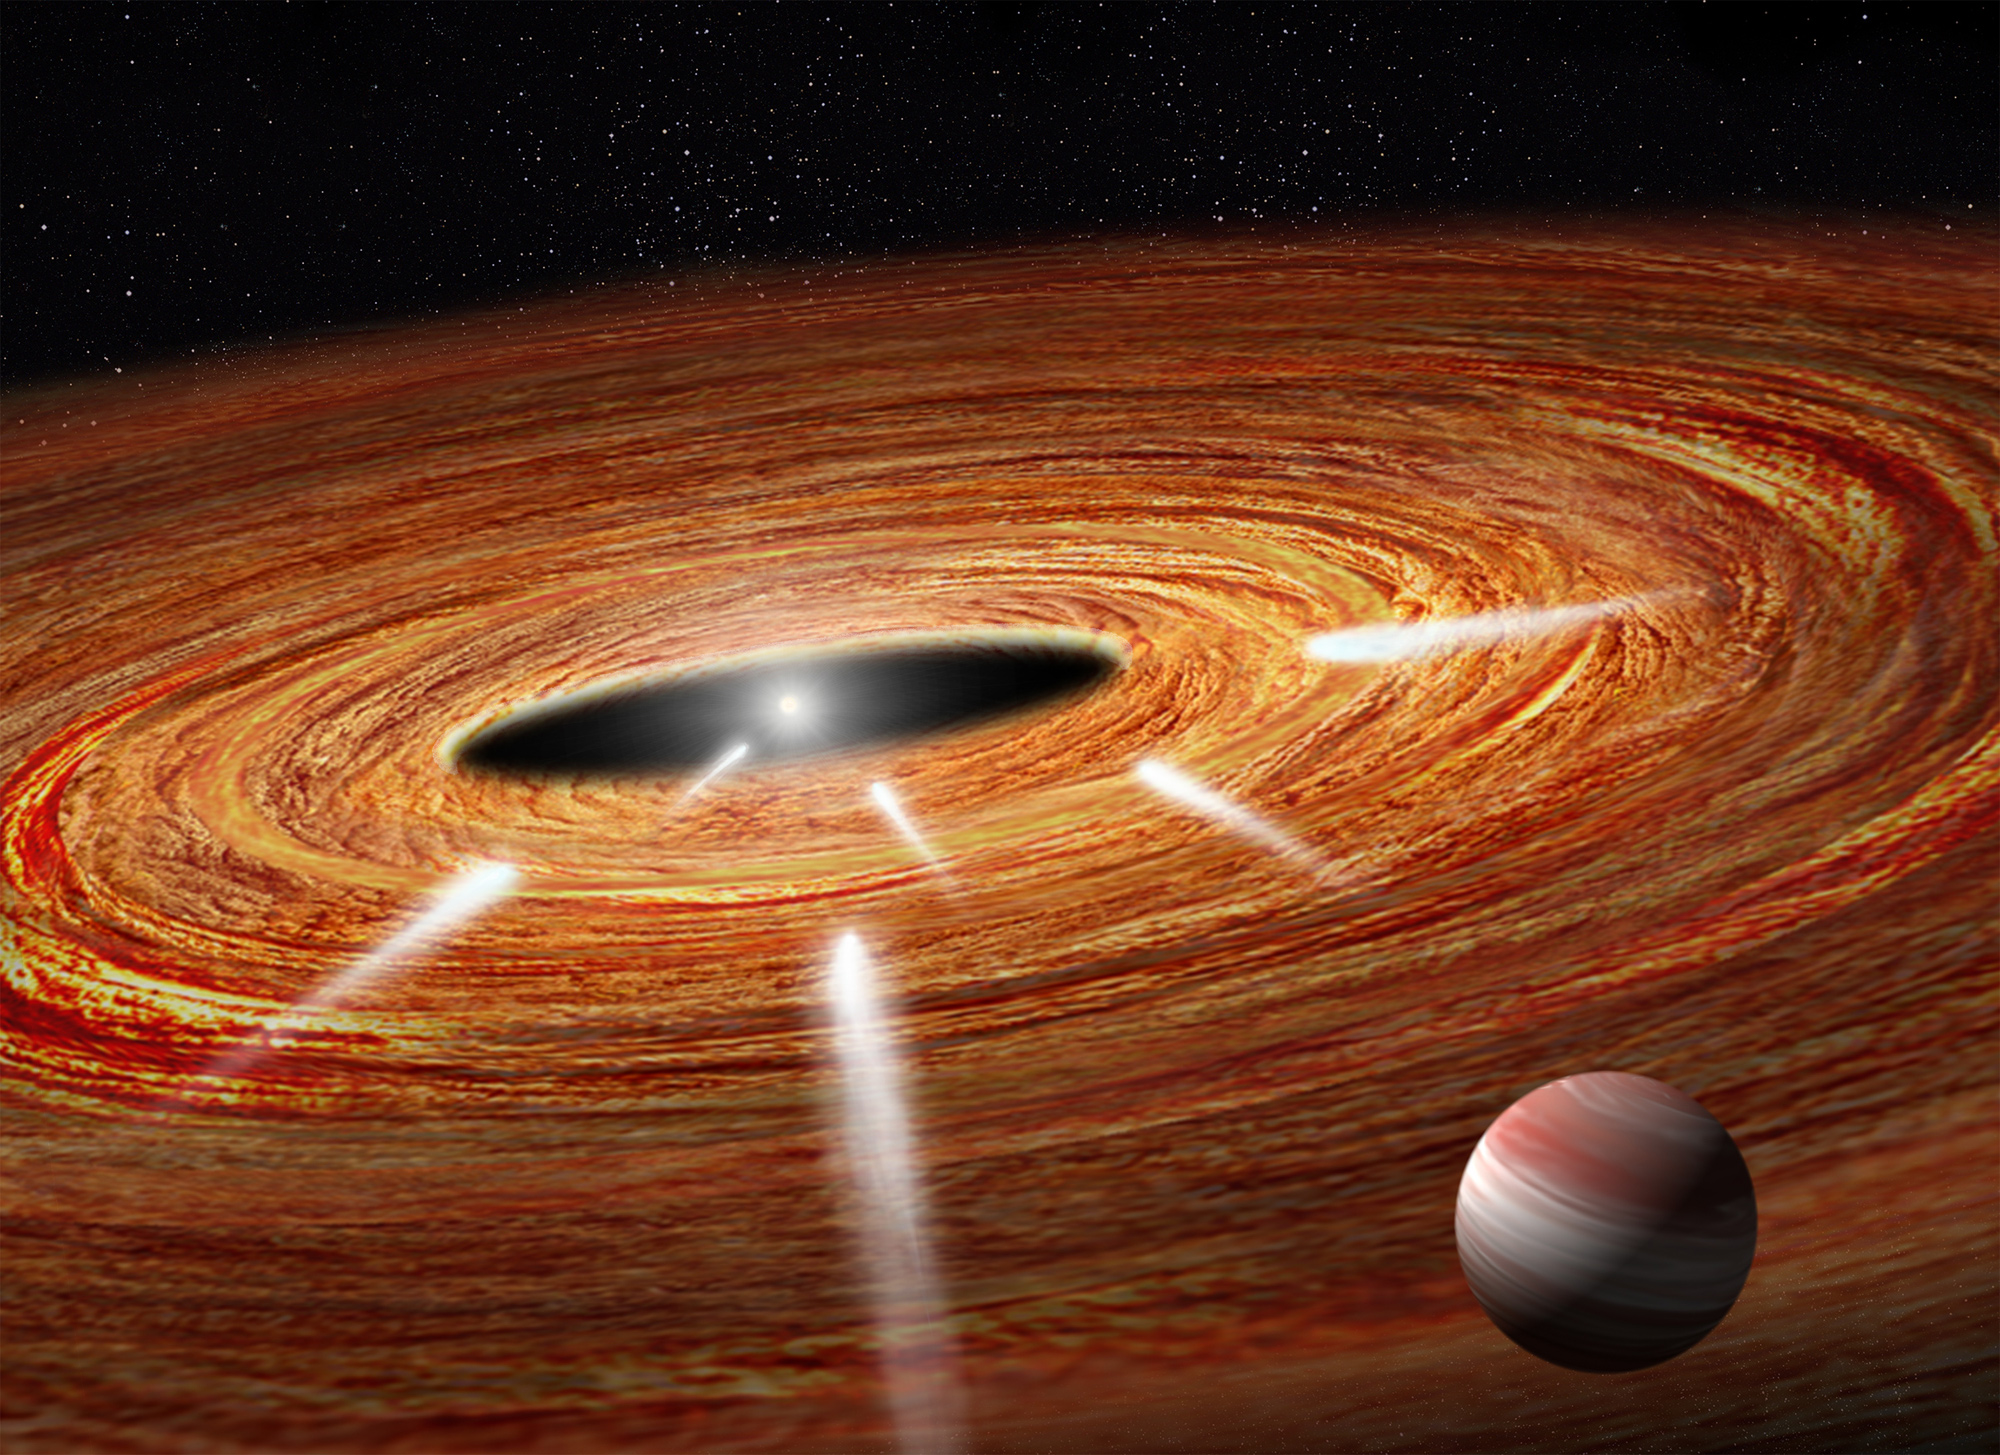 Hubble Spies Exocomets Diving into Young Star